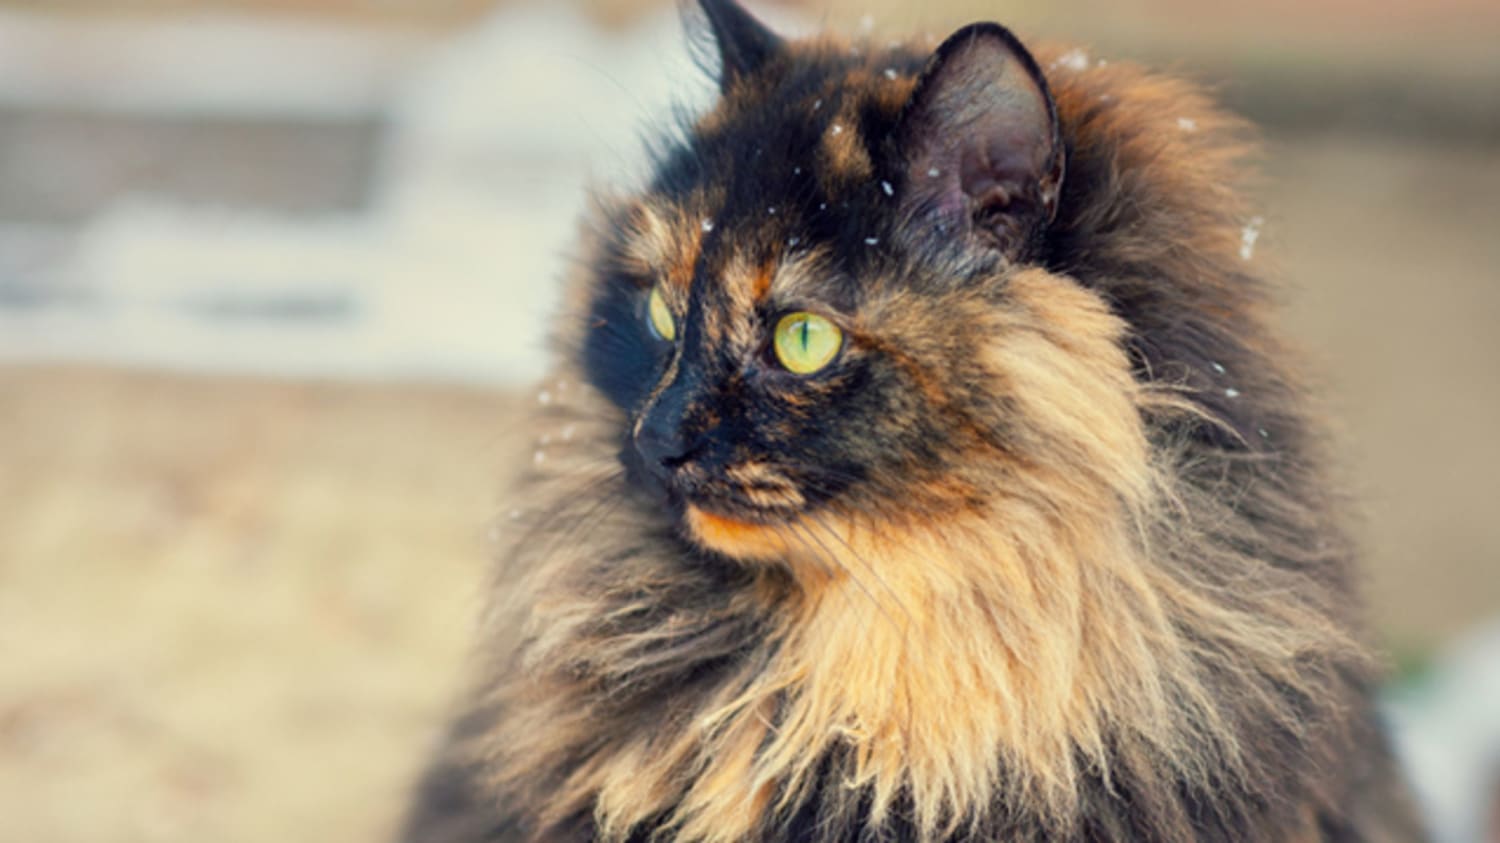 Multicolored Cats Might Be More Aggressive Than Other Cats, Study Finds